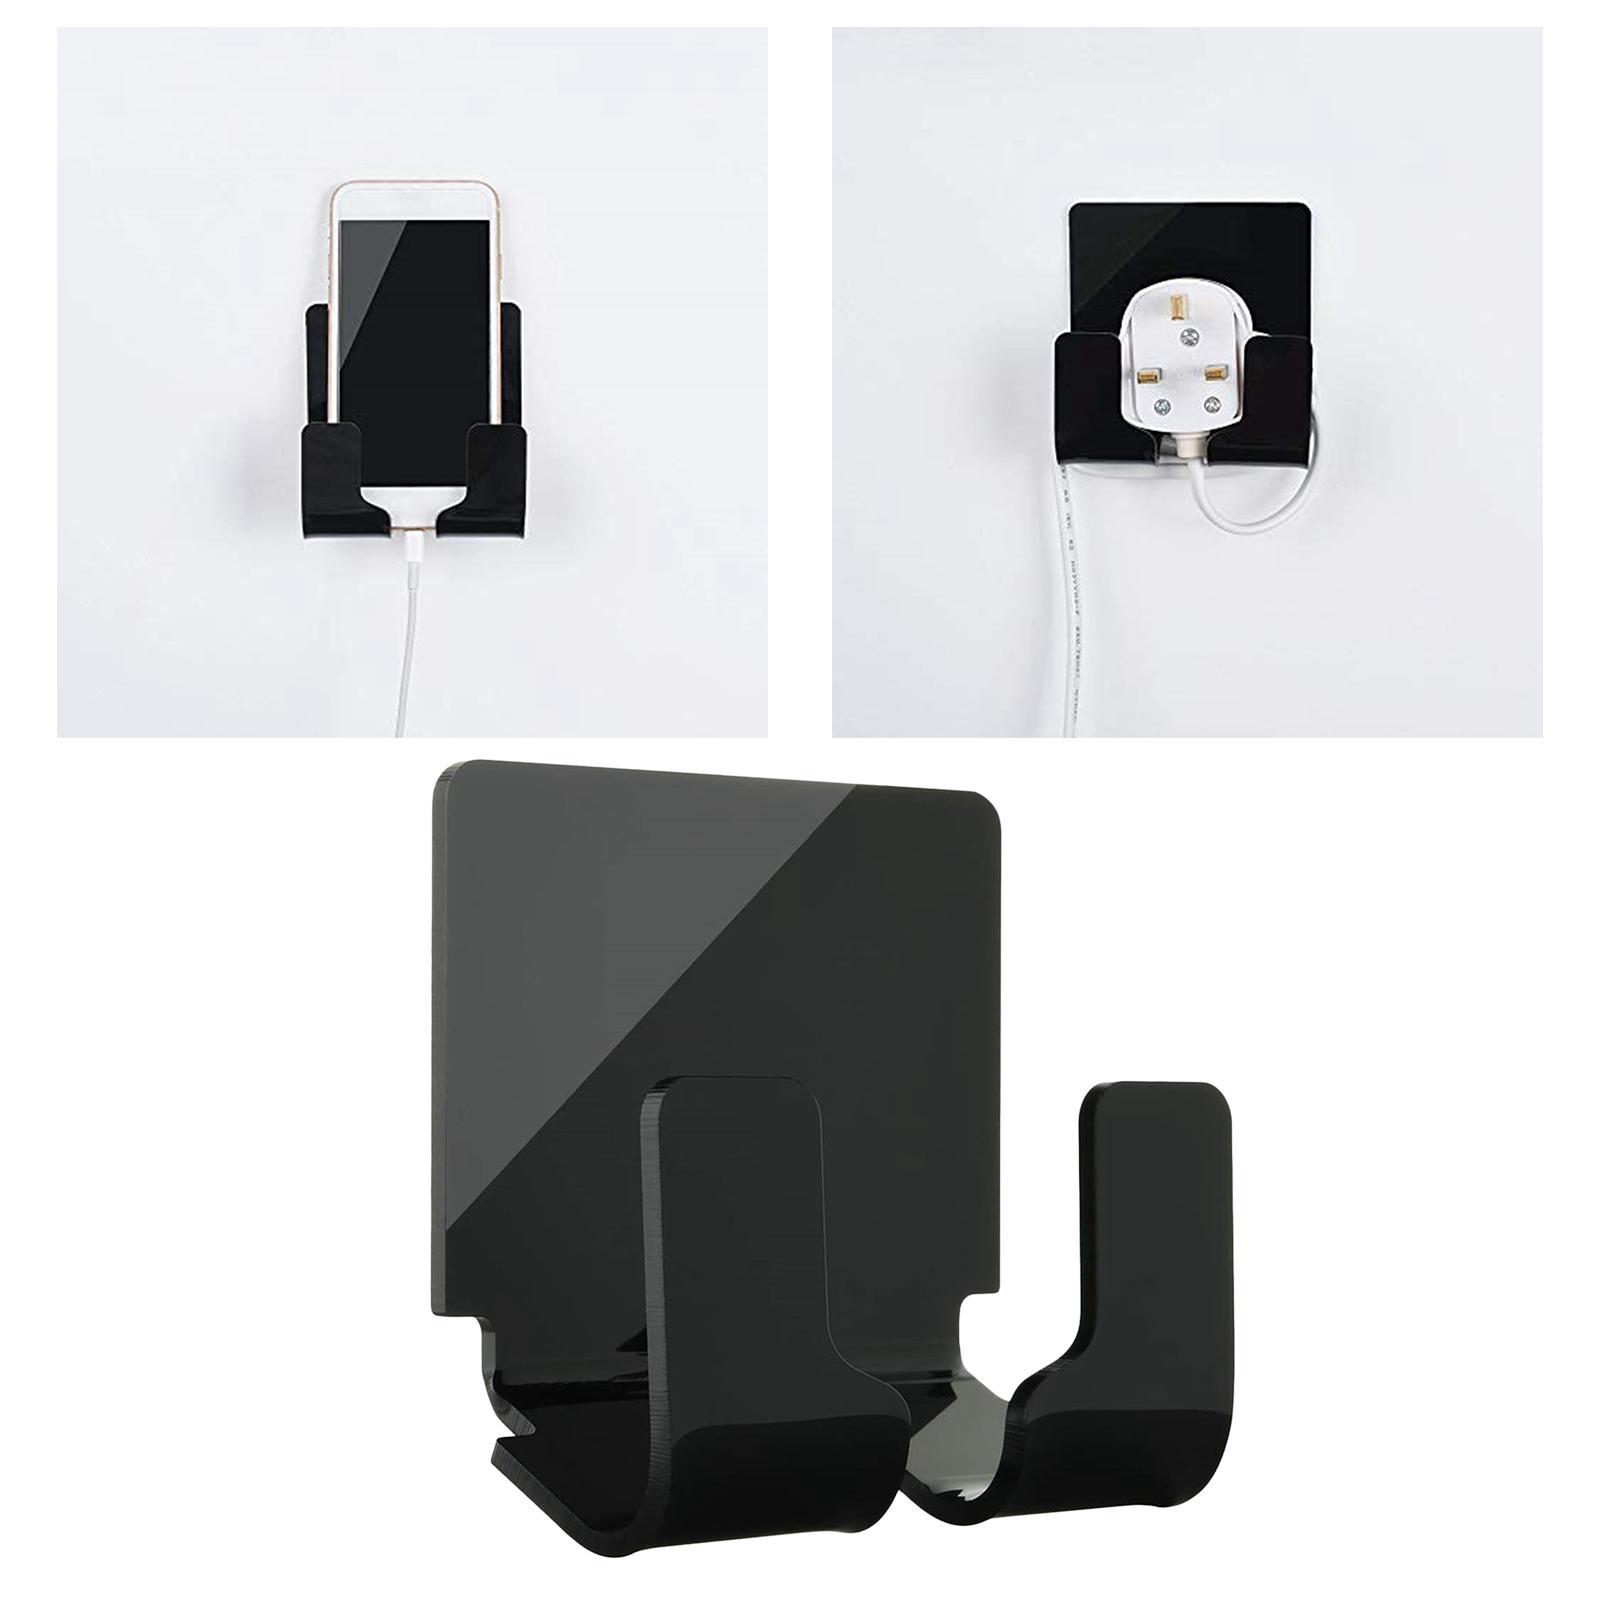 Durable Acrylic Phone Wall Charger Holder Remote Control Stand Bracket